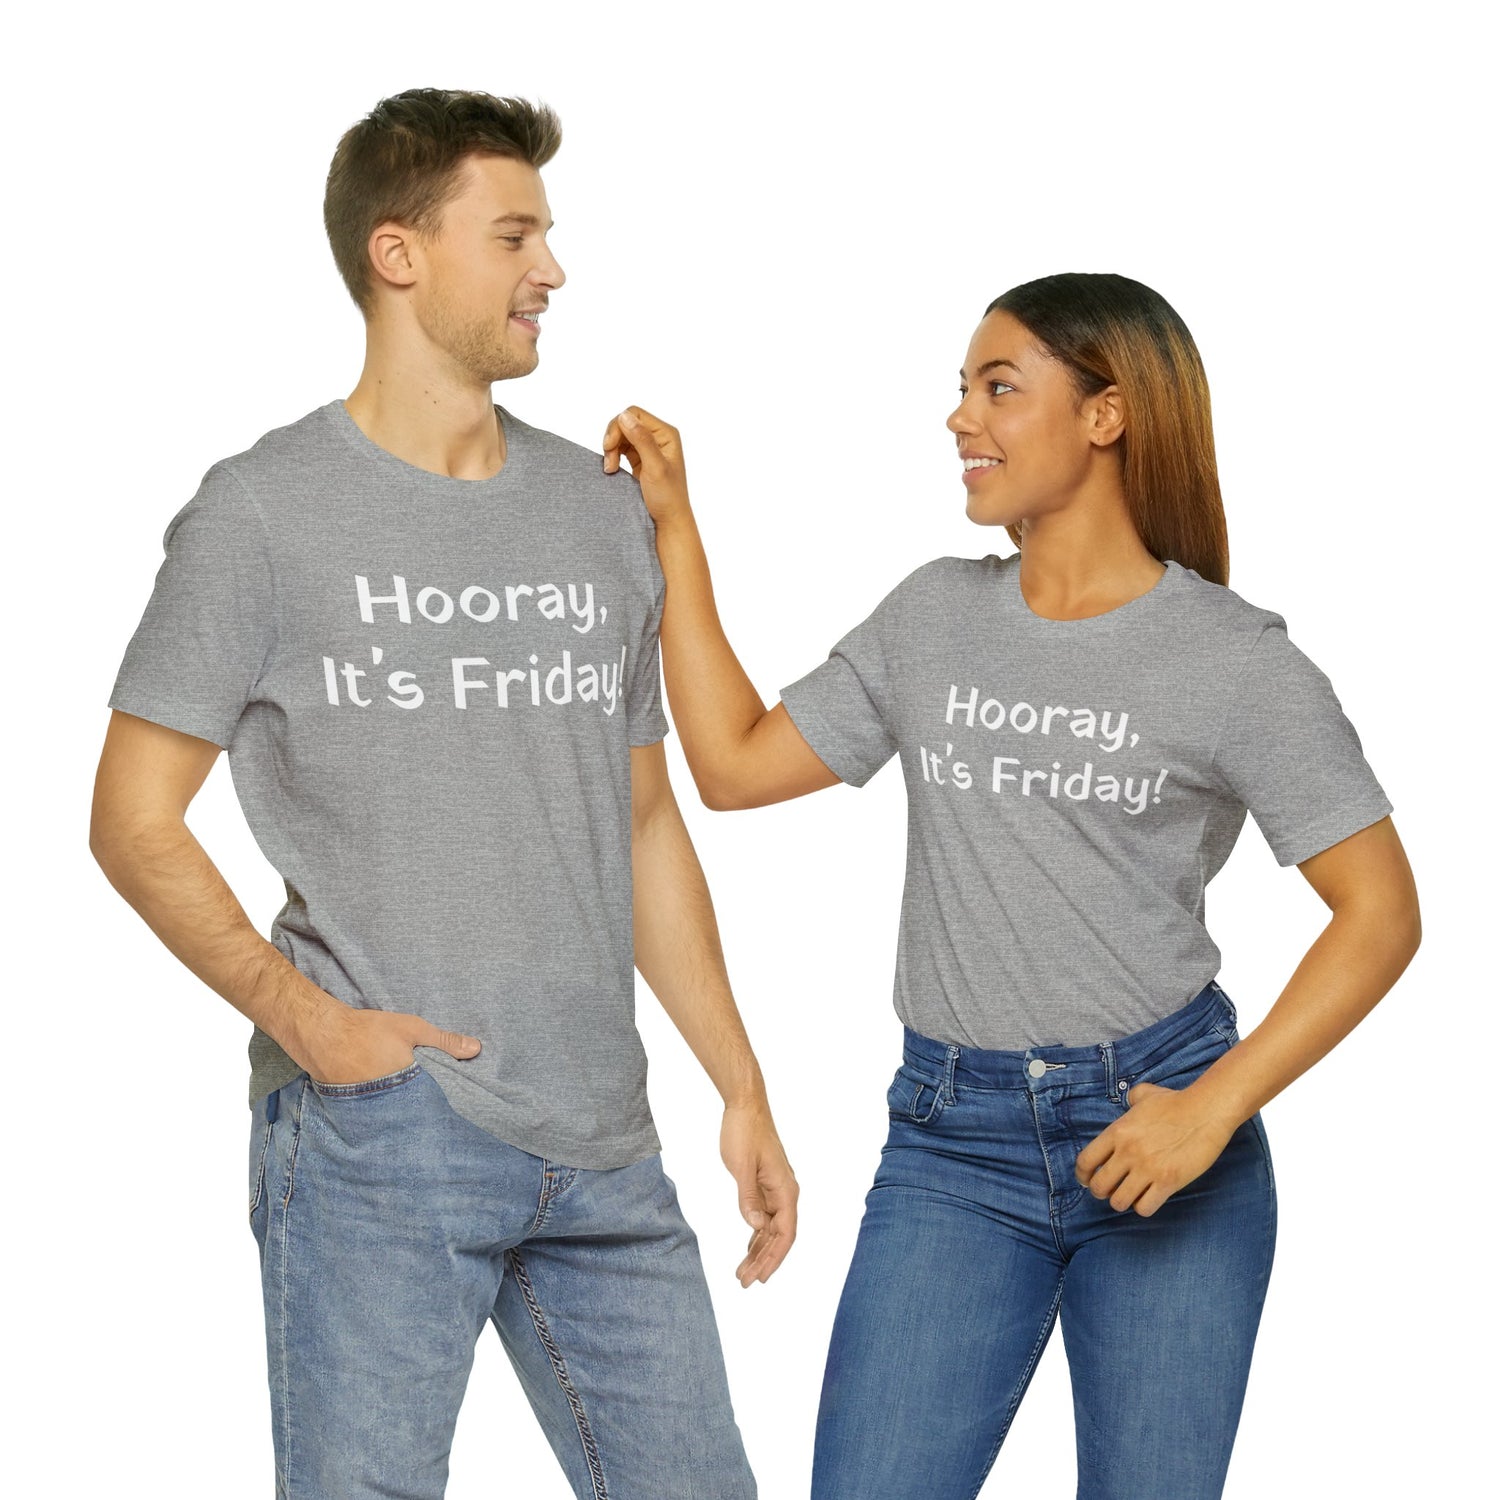 Funny Office Tee | Friday T-Shirt | Office Gift Idea Athletic Heather T-Shirt Petrova Designs